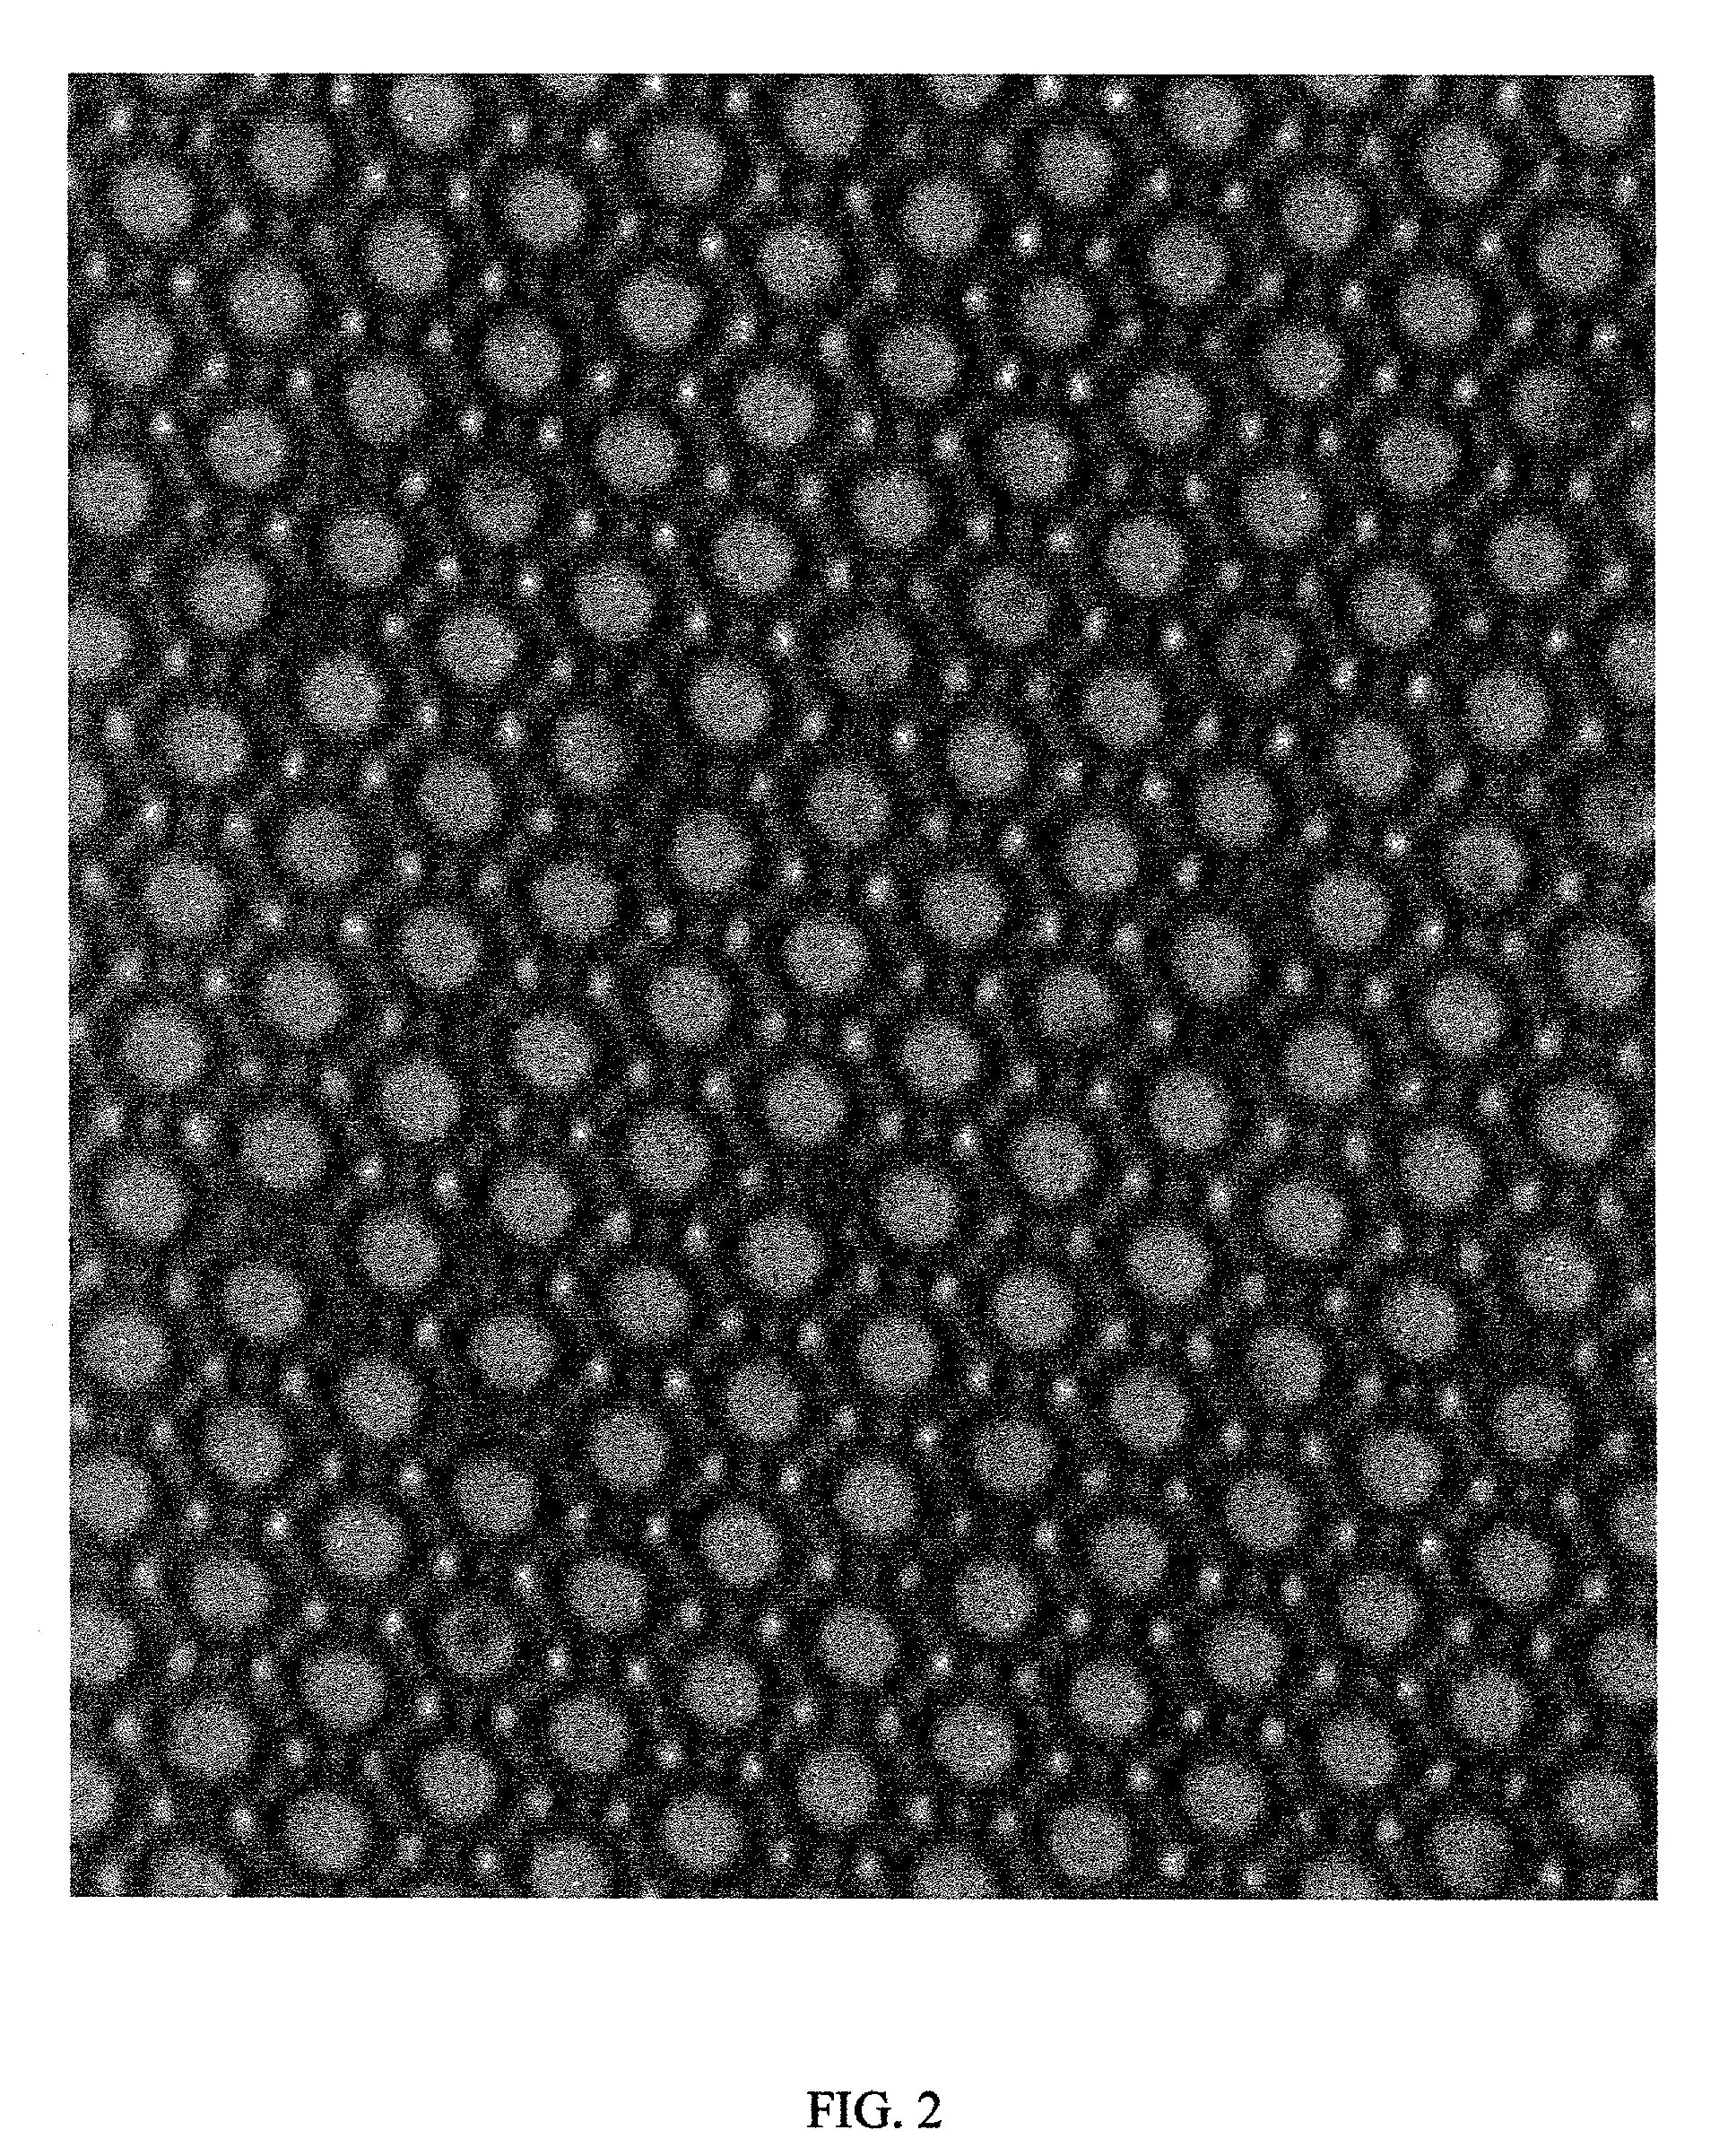 Method of producing quantum-dot powder and film via templating by a 2-d ordered array of air bubbles in a polymer